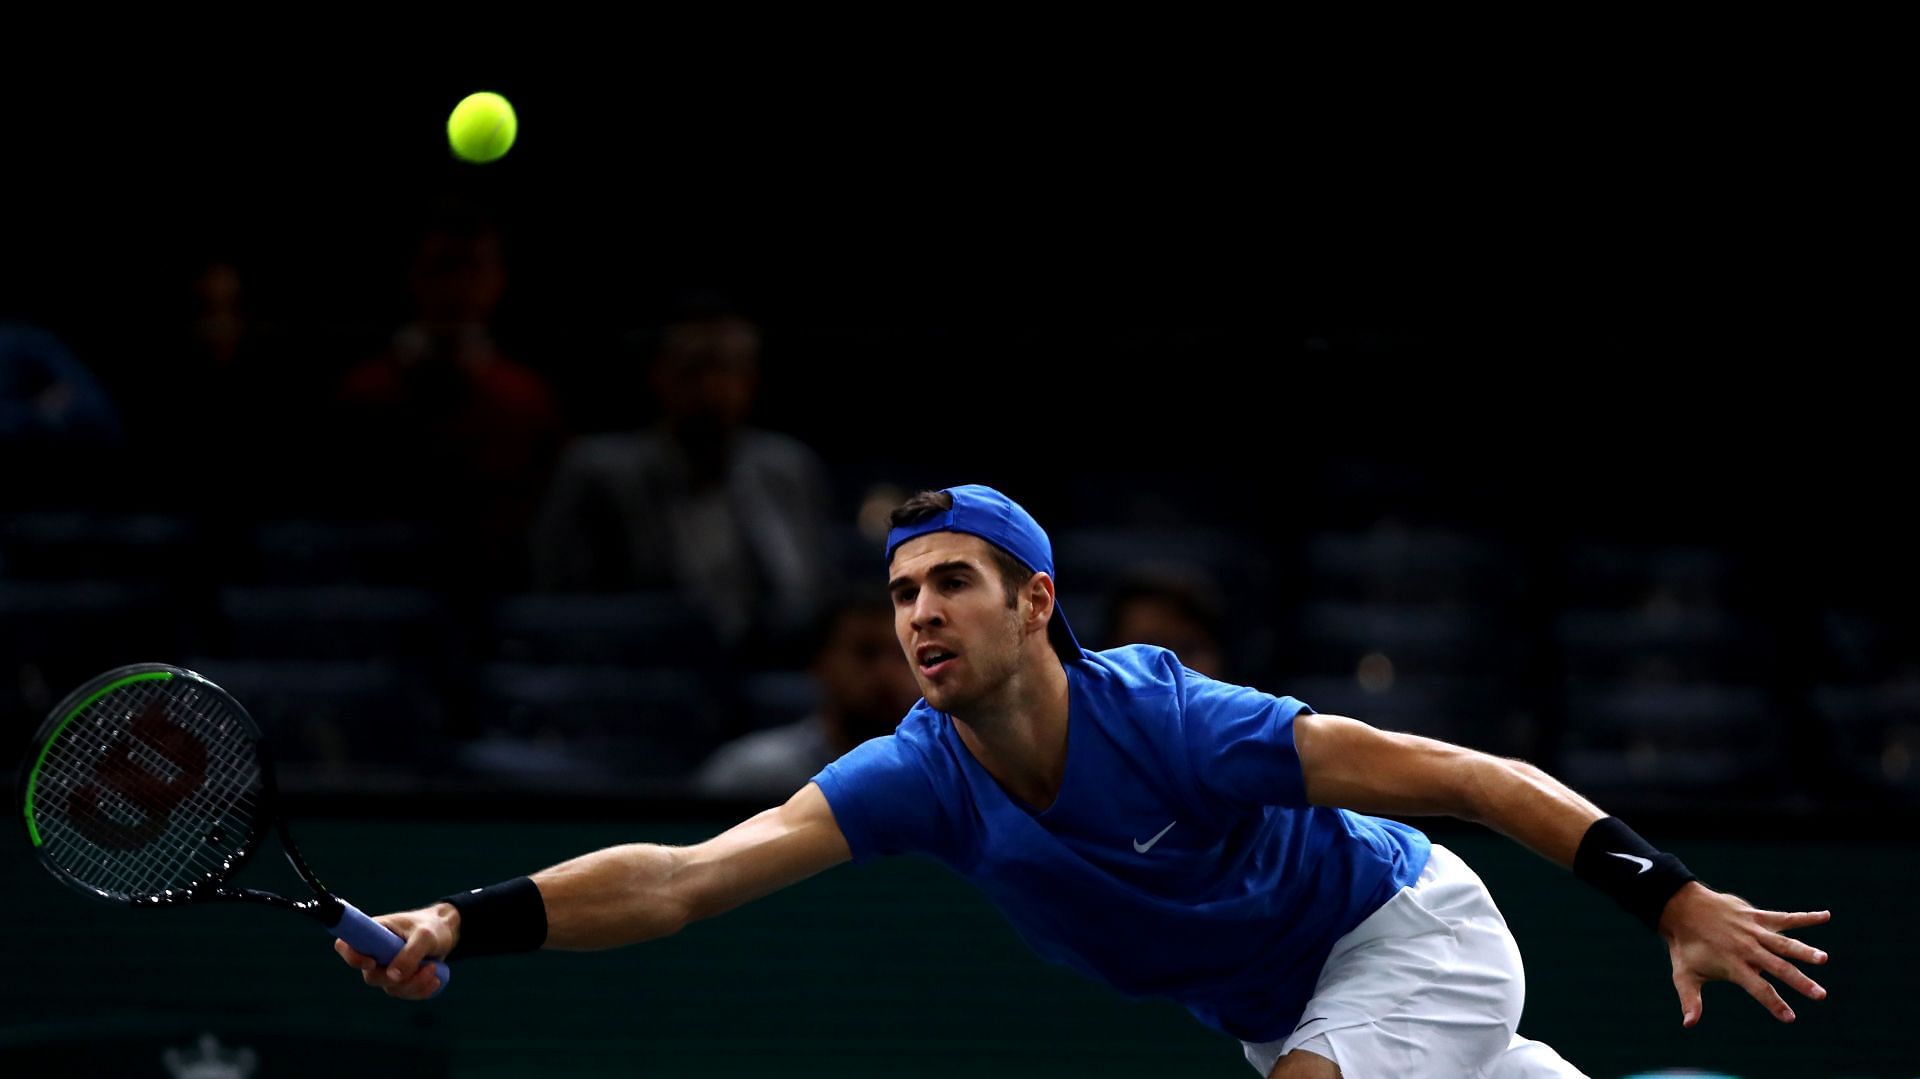 Khachanov will look to take on the role of the aggressor.